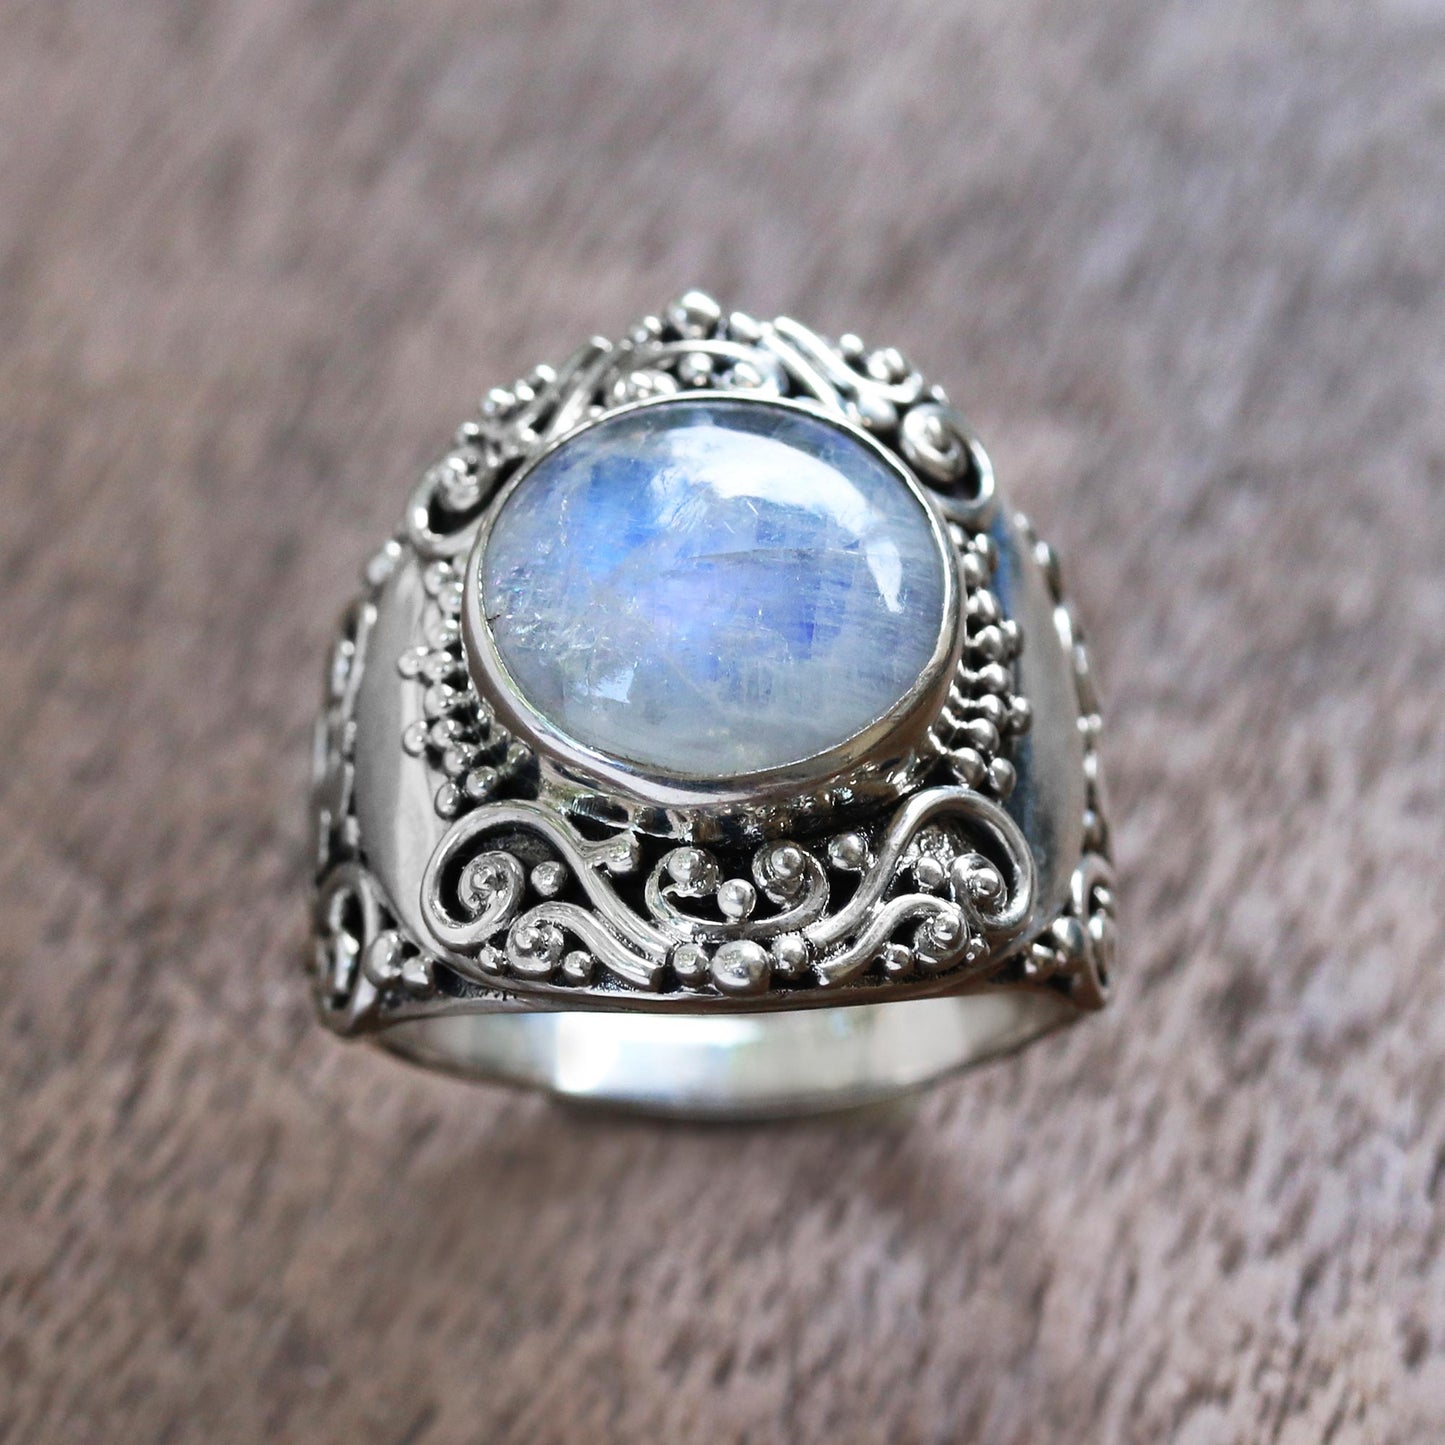 Nighttime Garden Rainbow Moonstone Cocktail Ring from Bali